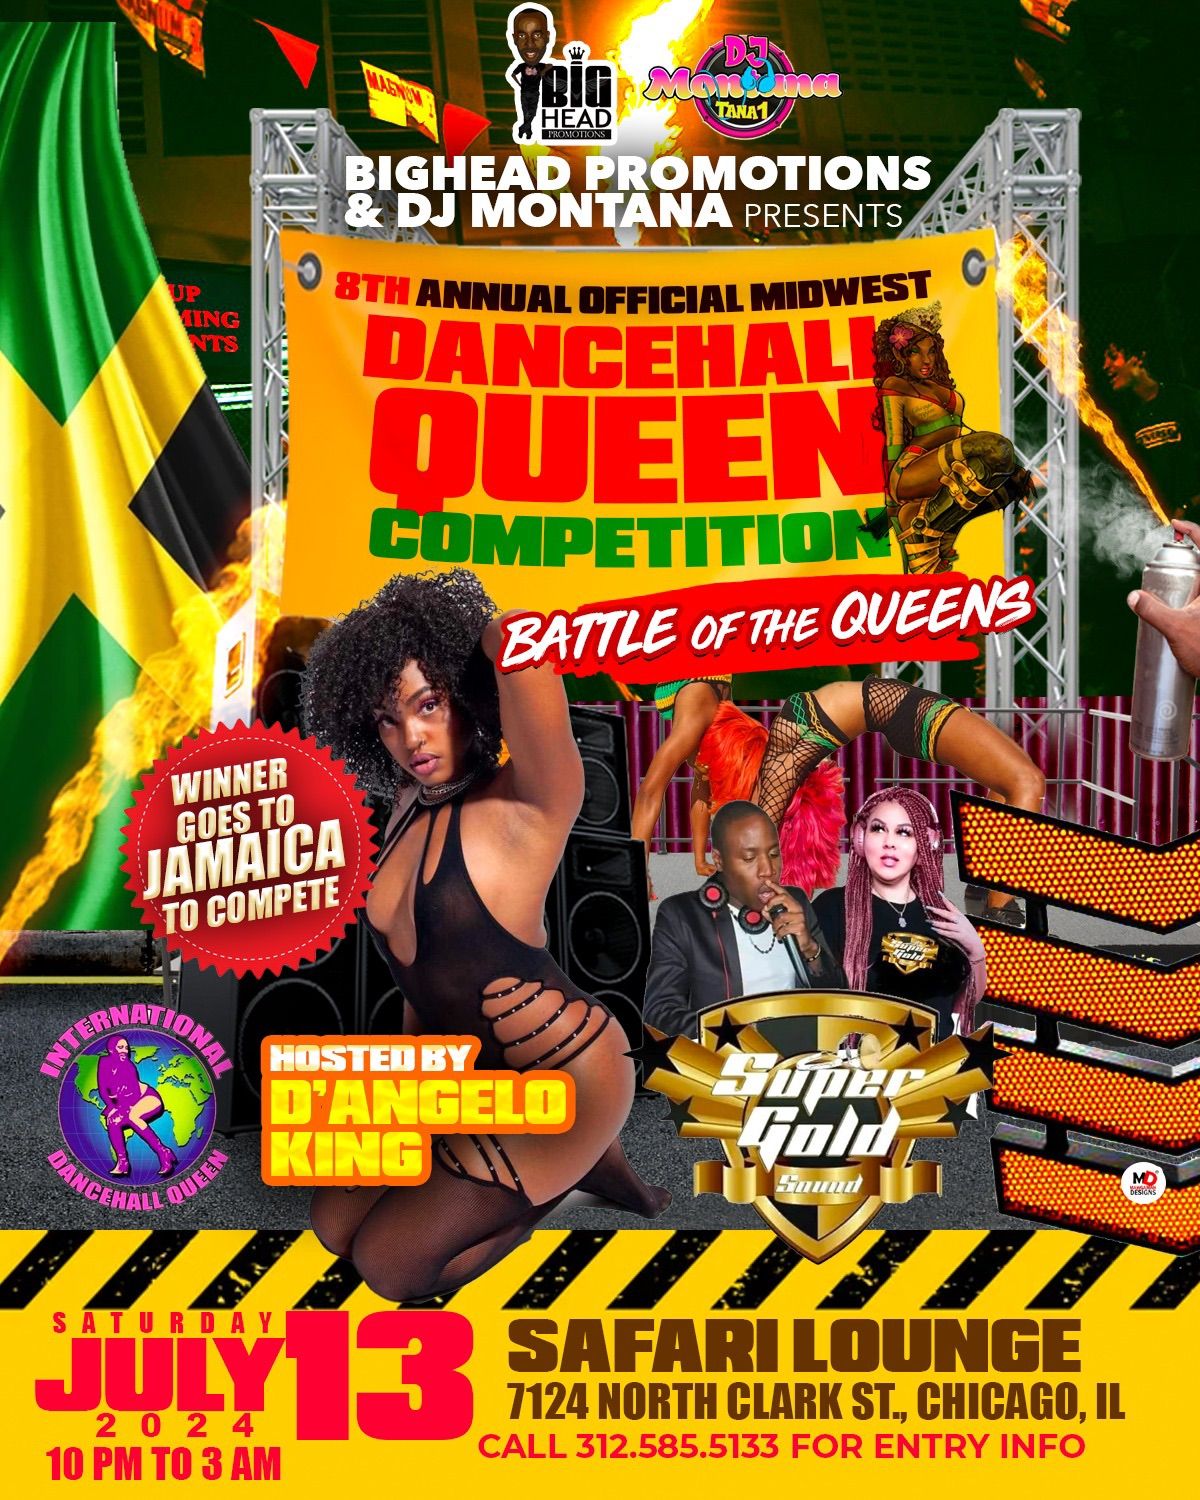 8th Annual OFFICIAL MIDWEST DANCEHALL QUEEN COMPETITION